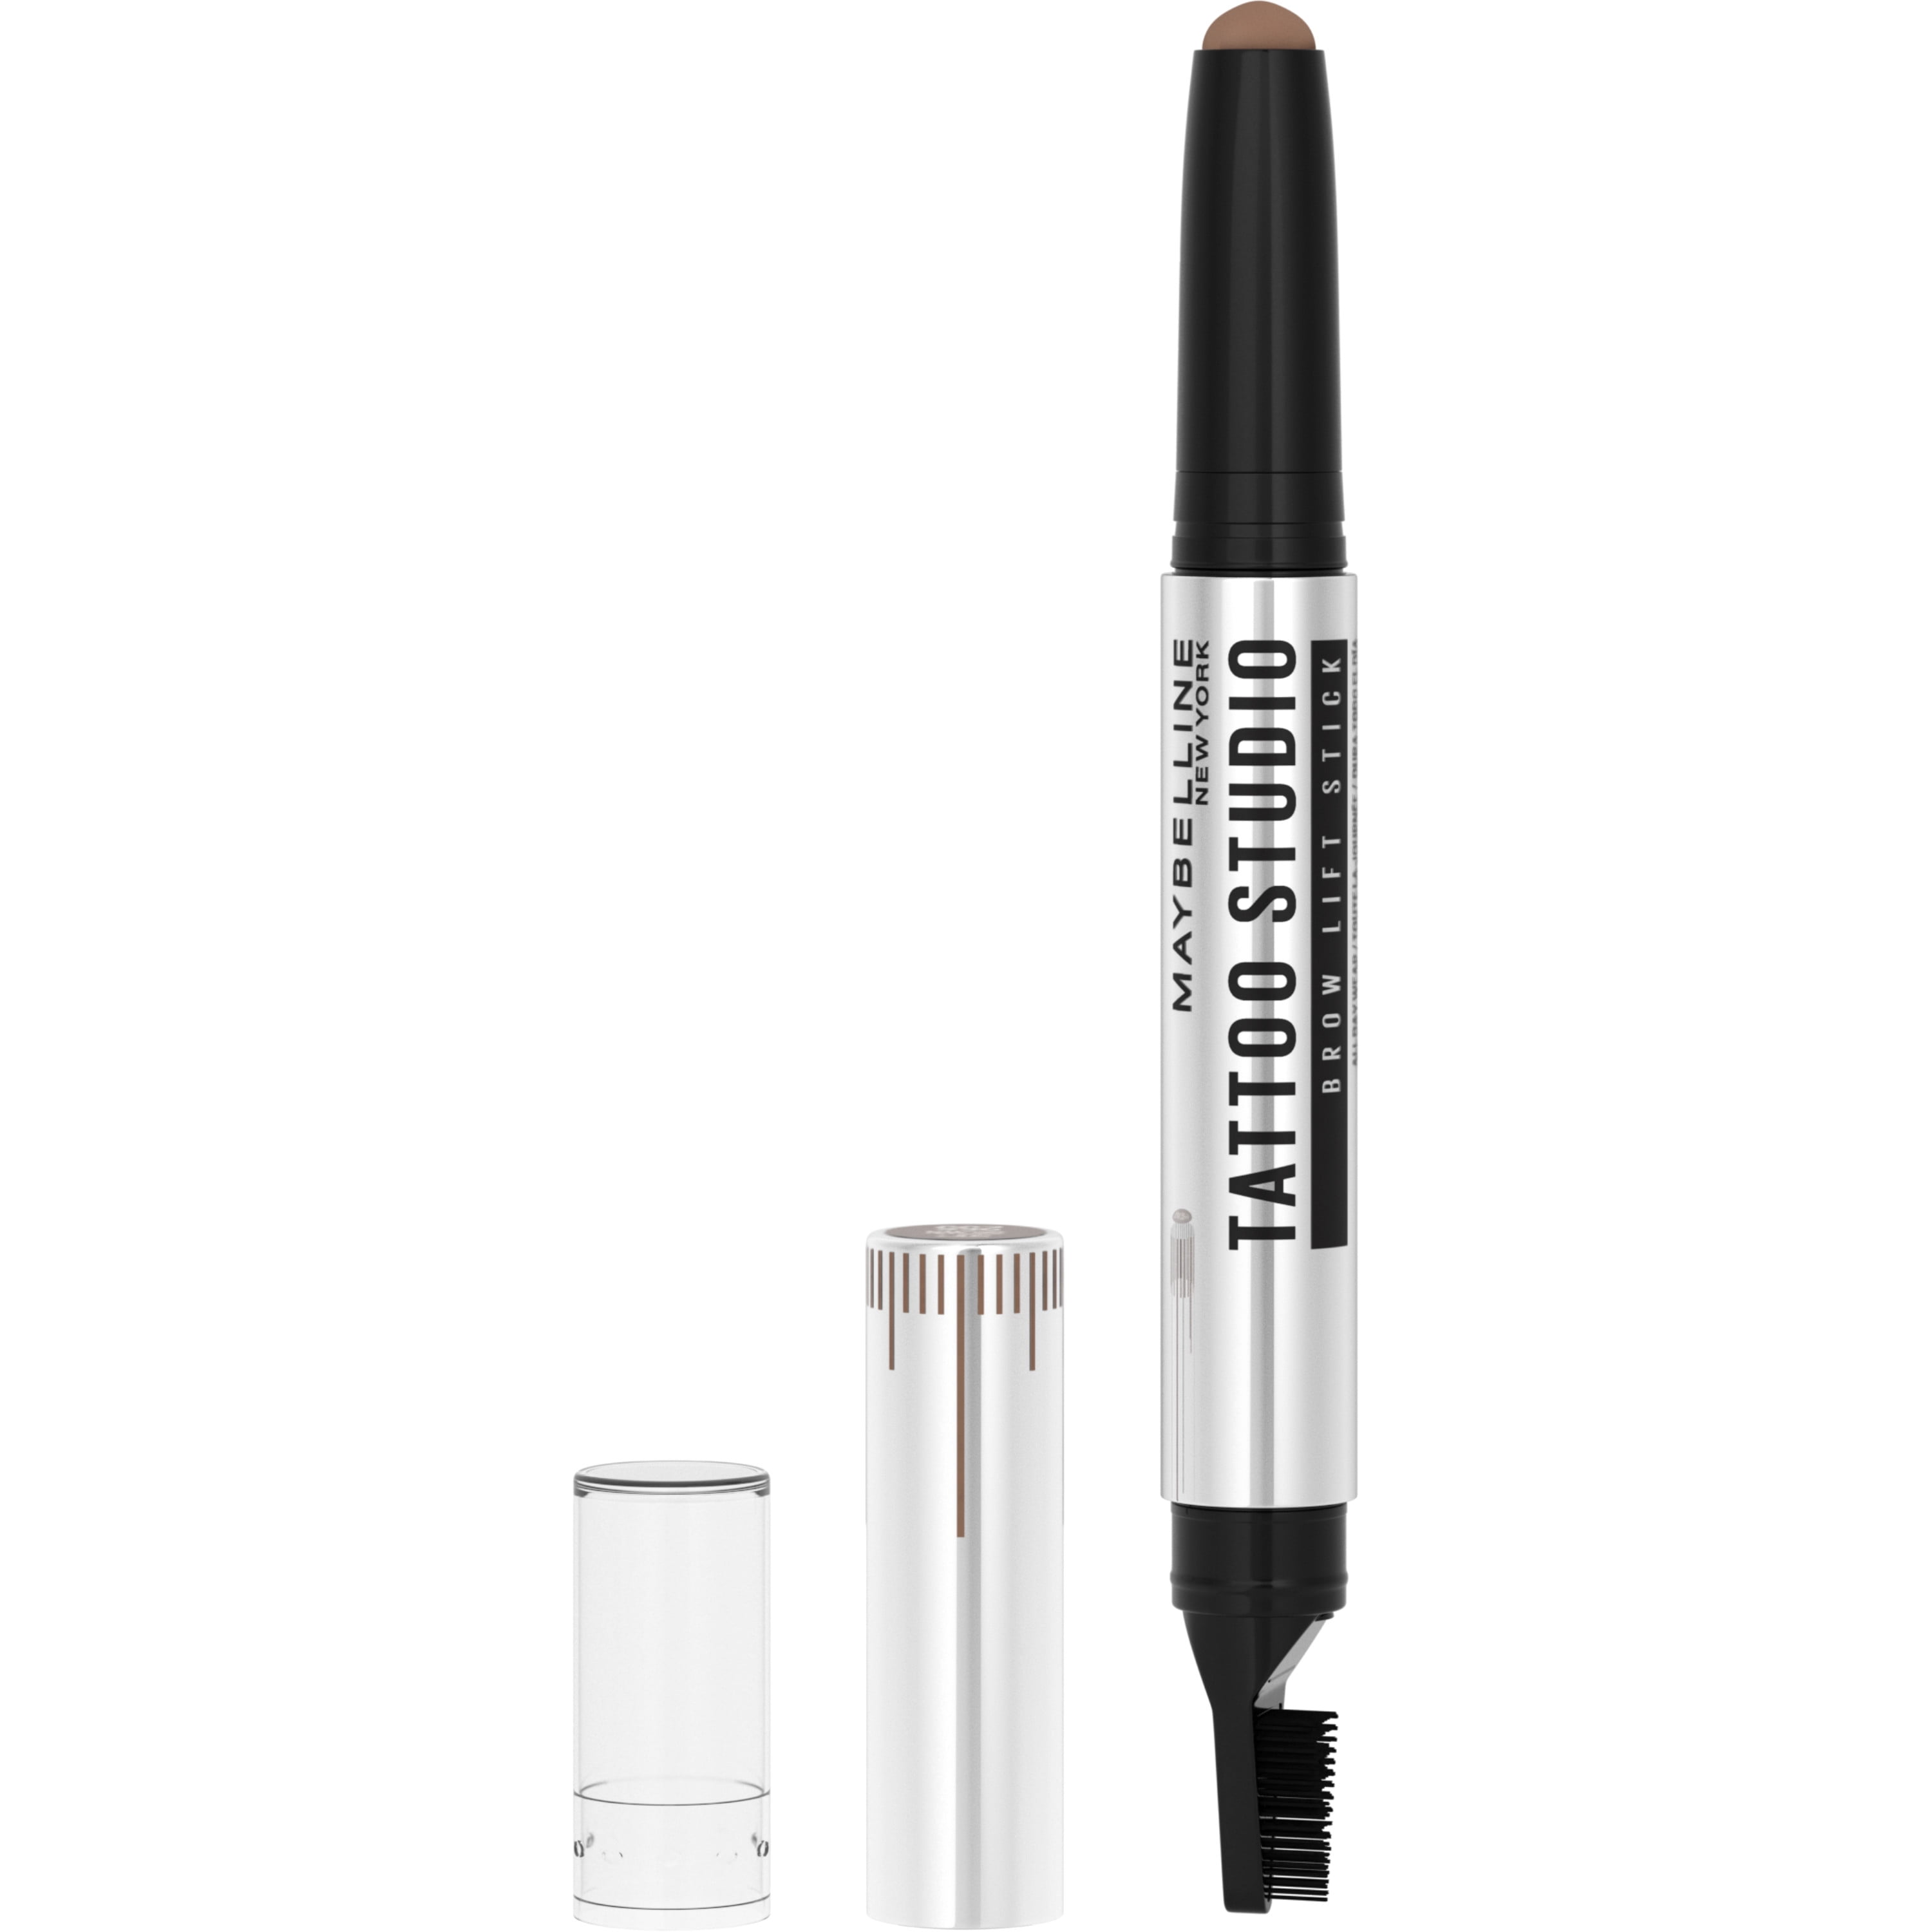 Maybelline Tattoo Studio Brow Fade and Smudge Resistant Lift Stick, Soft Brown